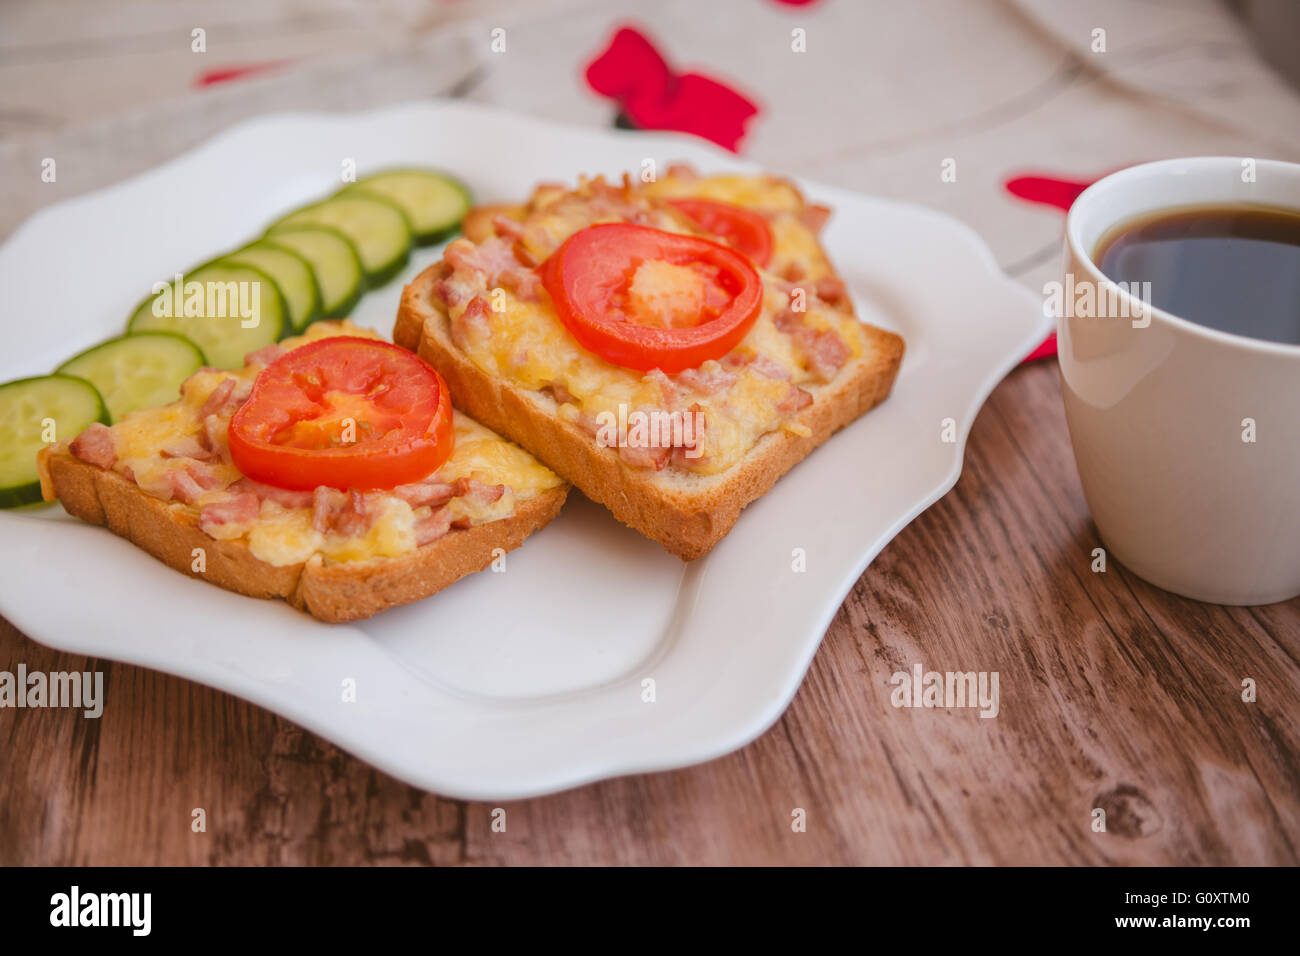 Morning breakfast: homemade toasted open sandwich with ham and cheese, coffee and fresh vegetables on wooden background Stock Photo